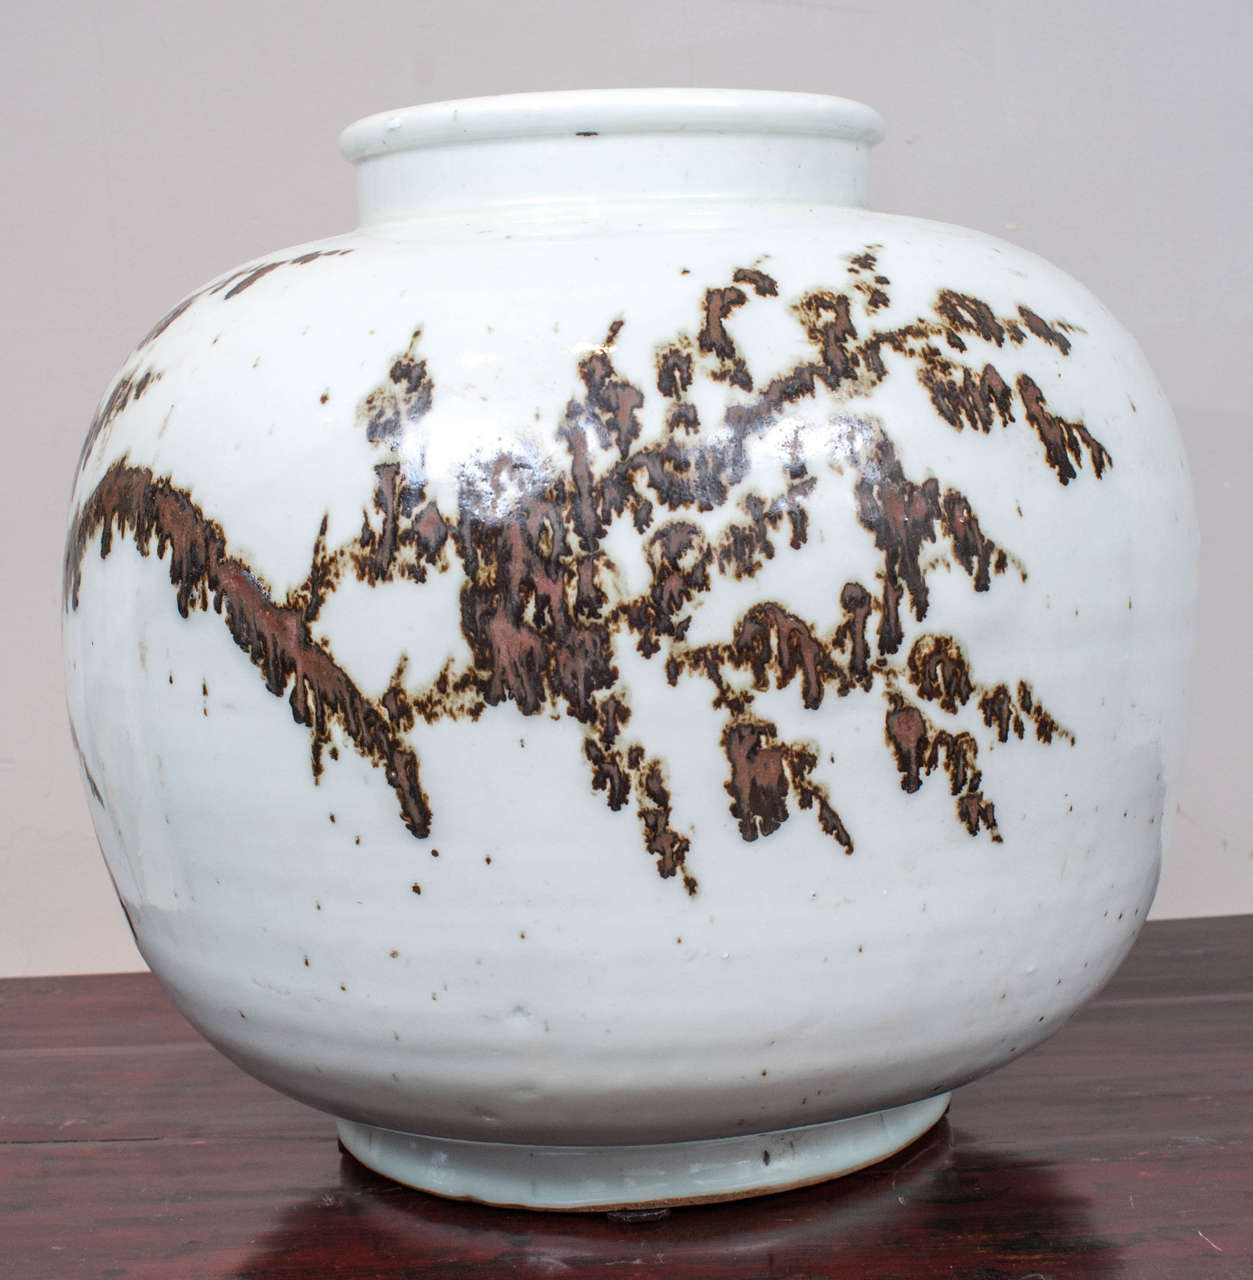 Brown and white abstracted design on 20th century round vessel.